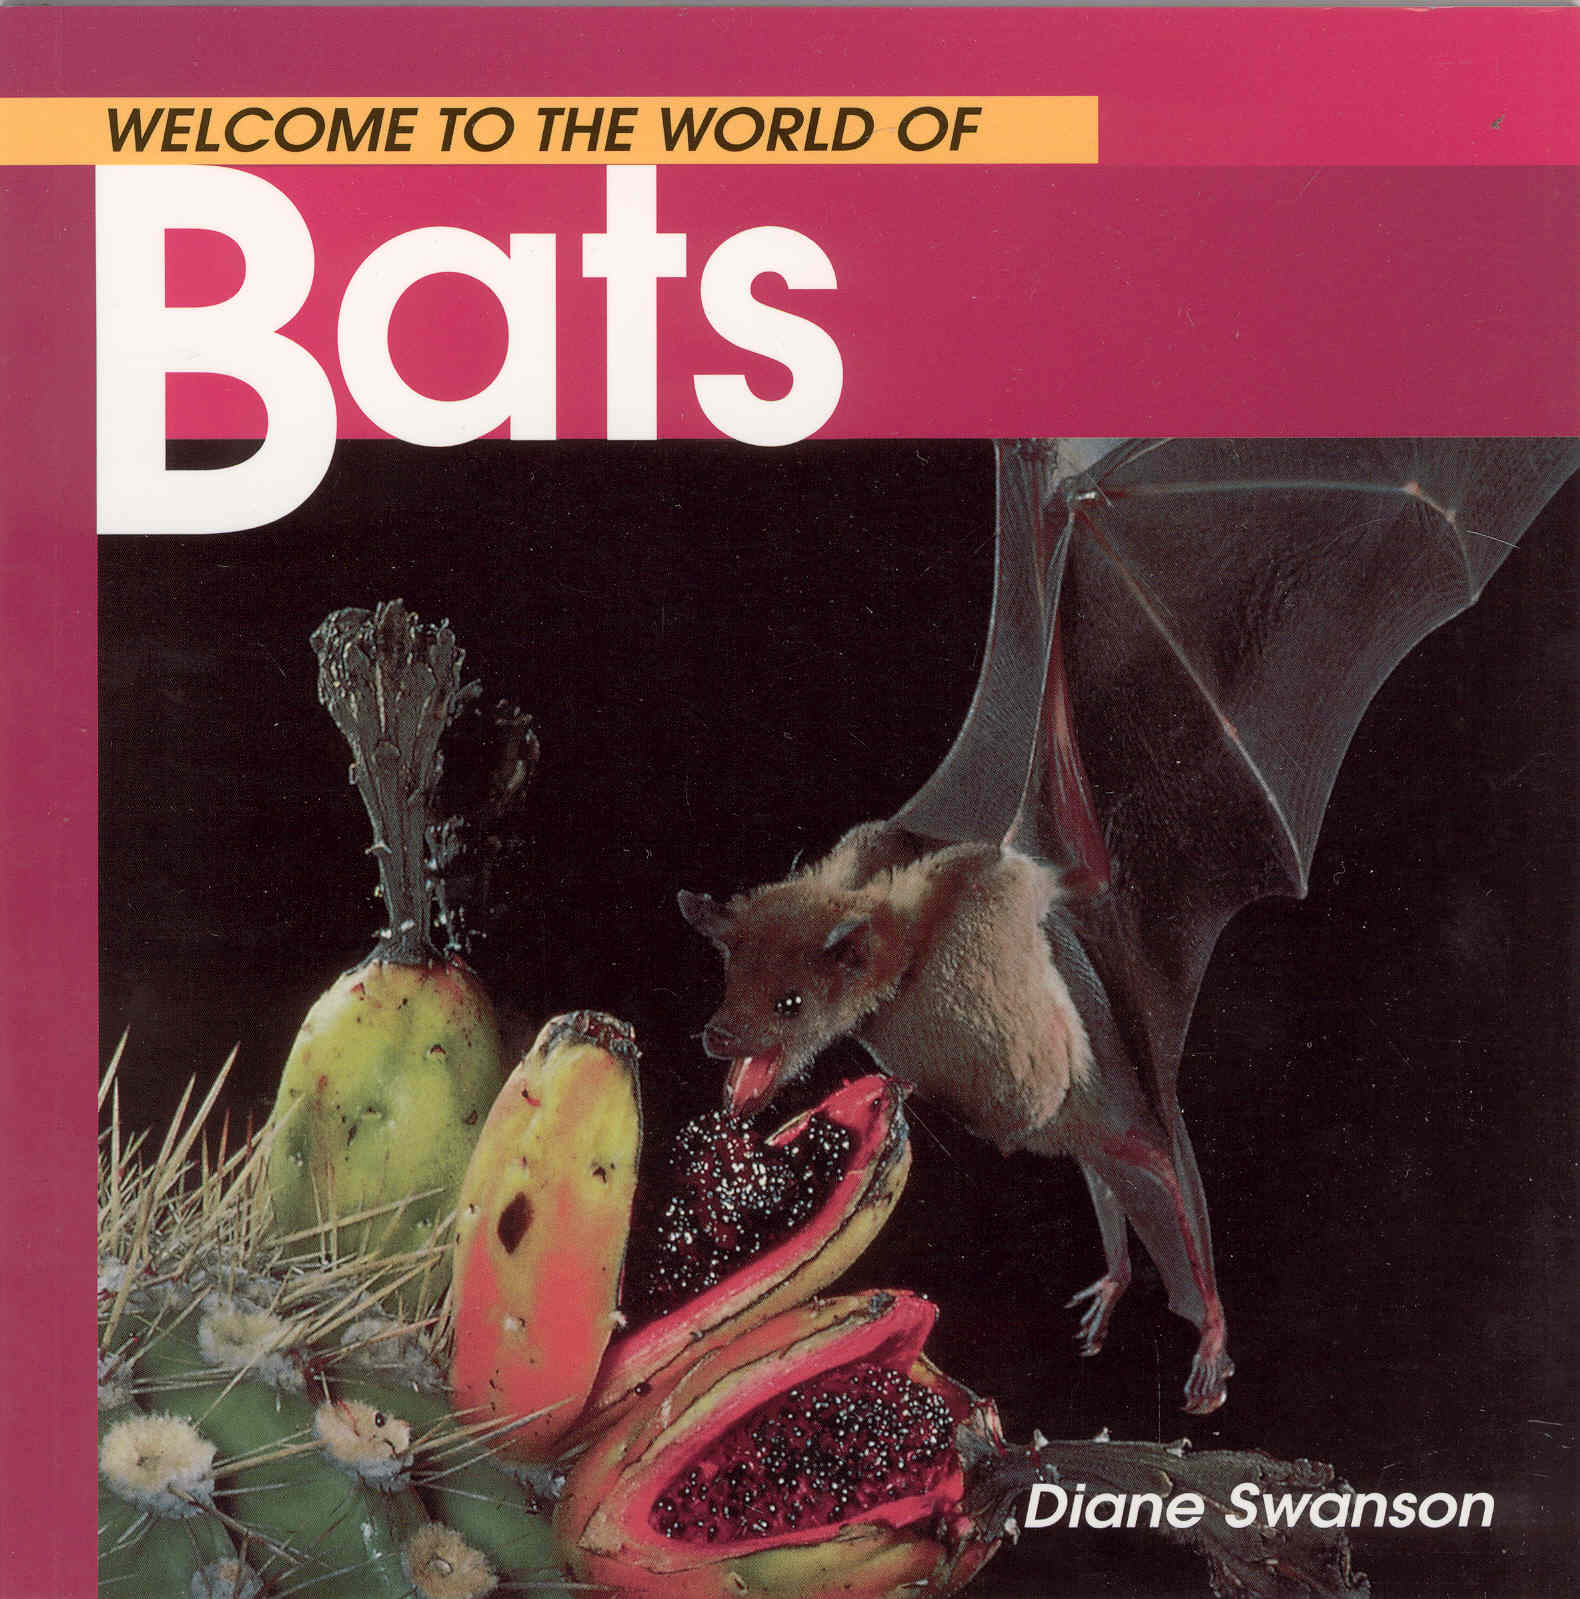 Welcome to the World of Bats